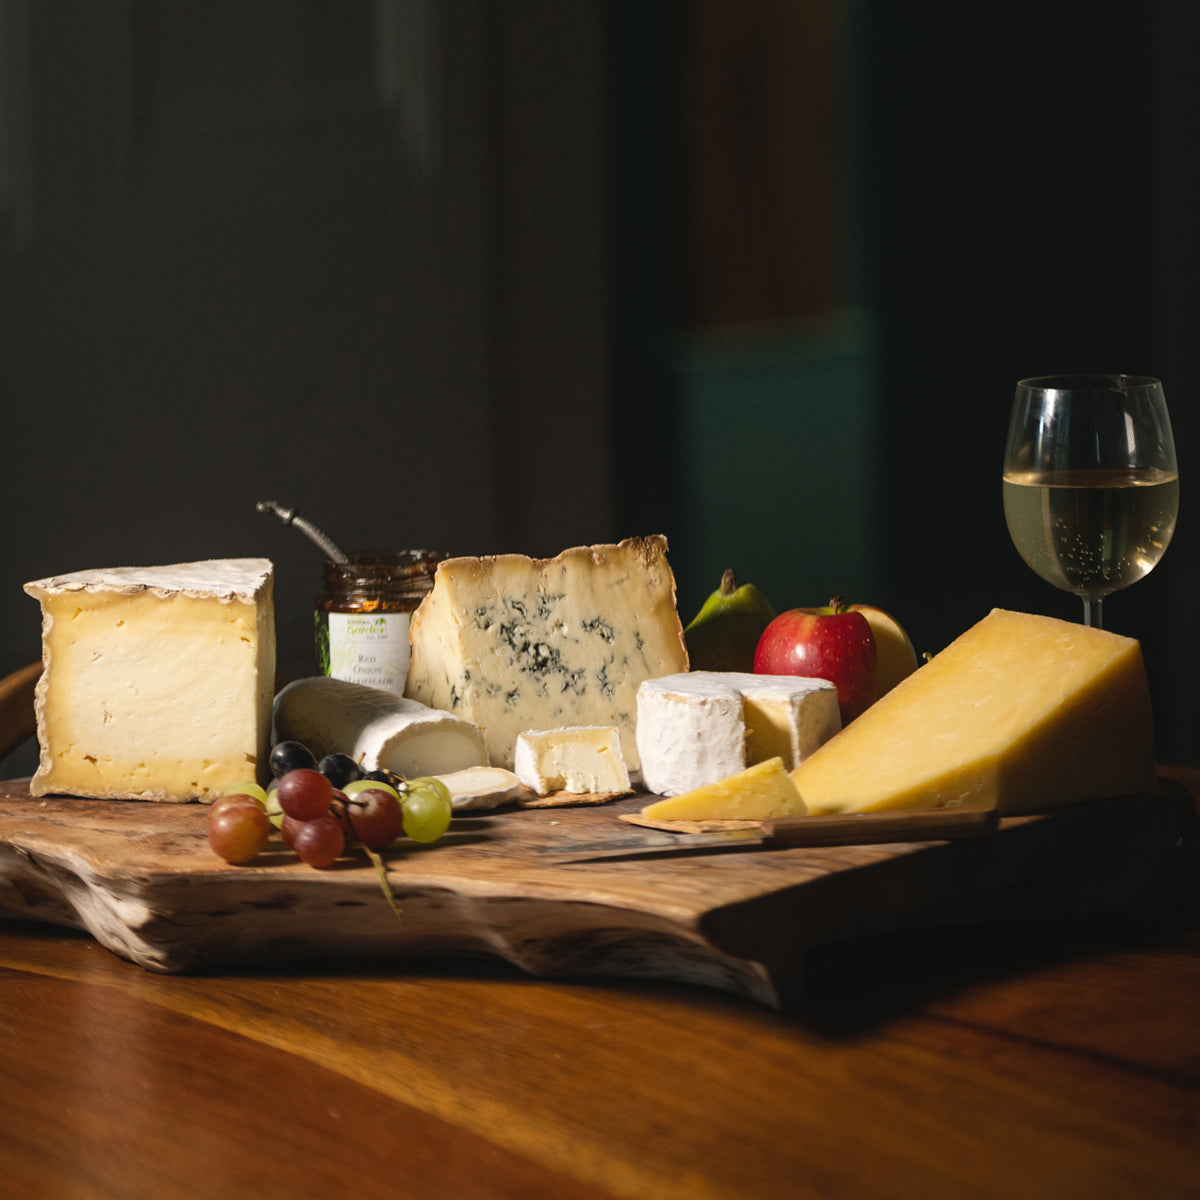 Handmade British Cheeses and Gifts by The Trethowan Brothers